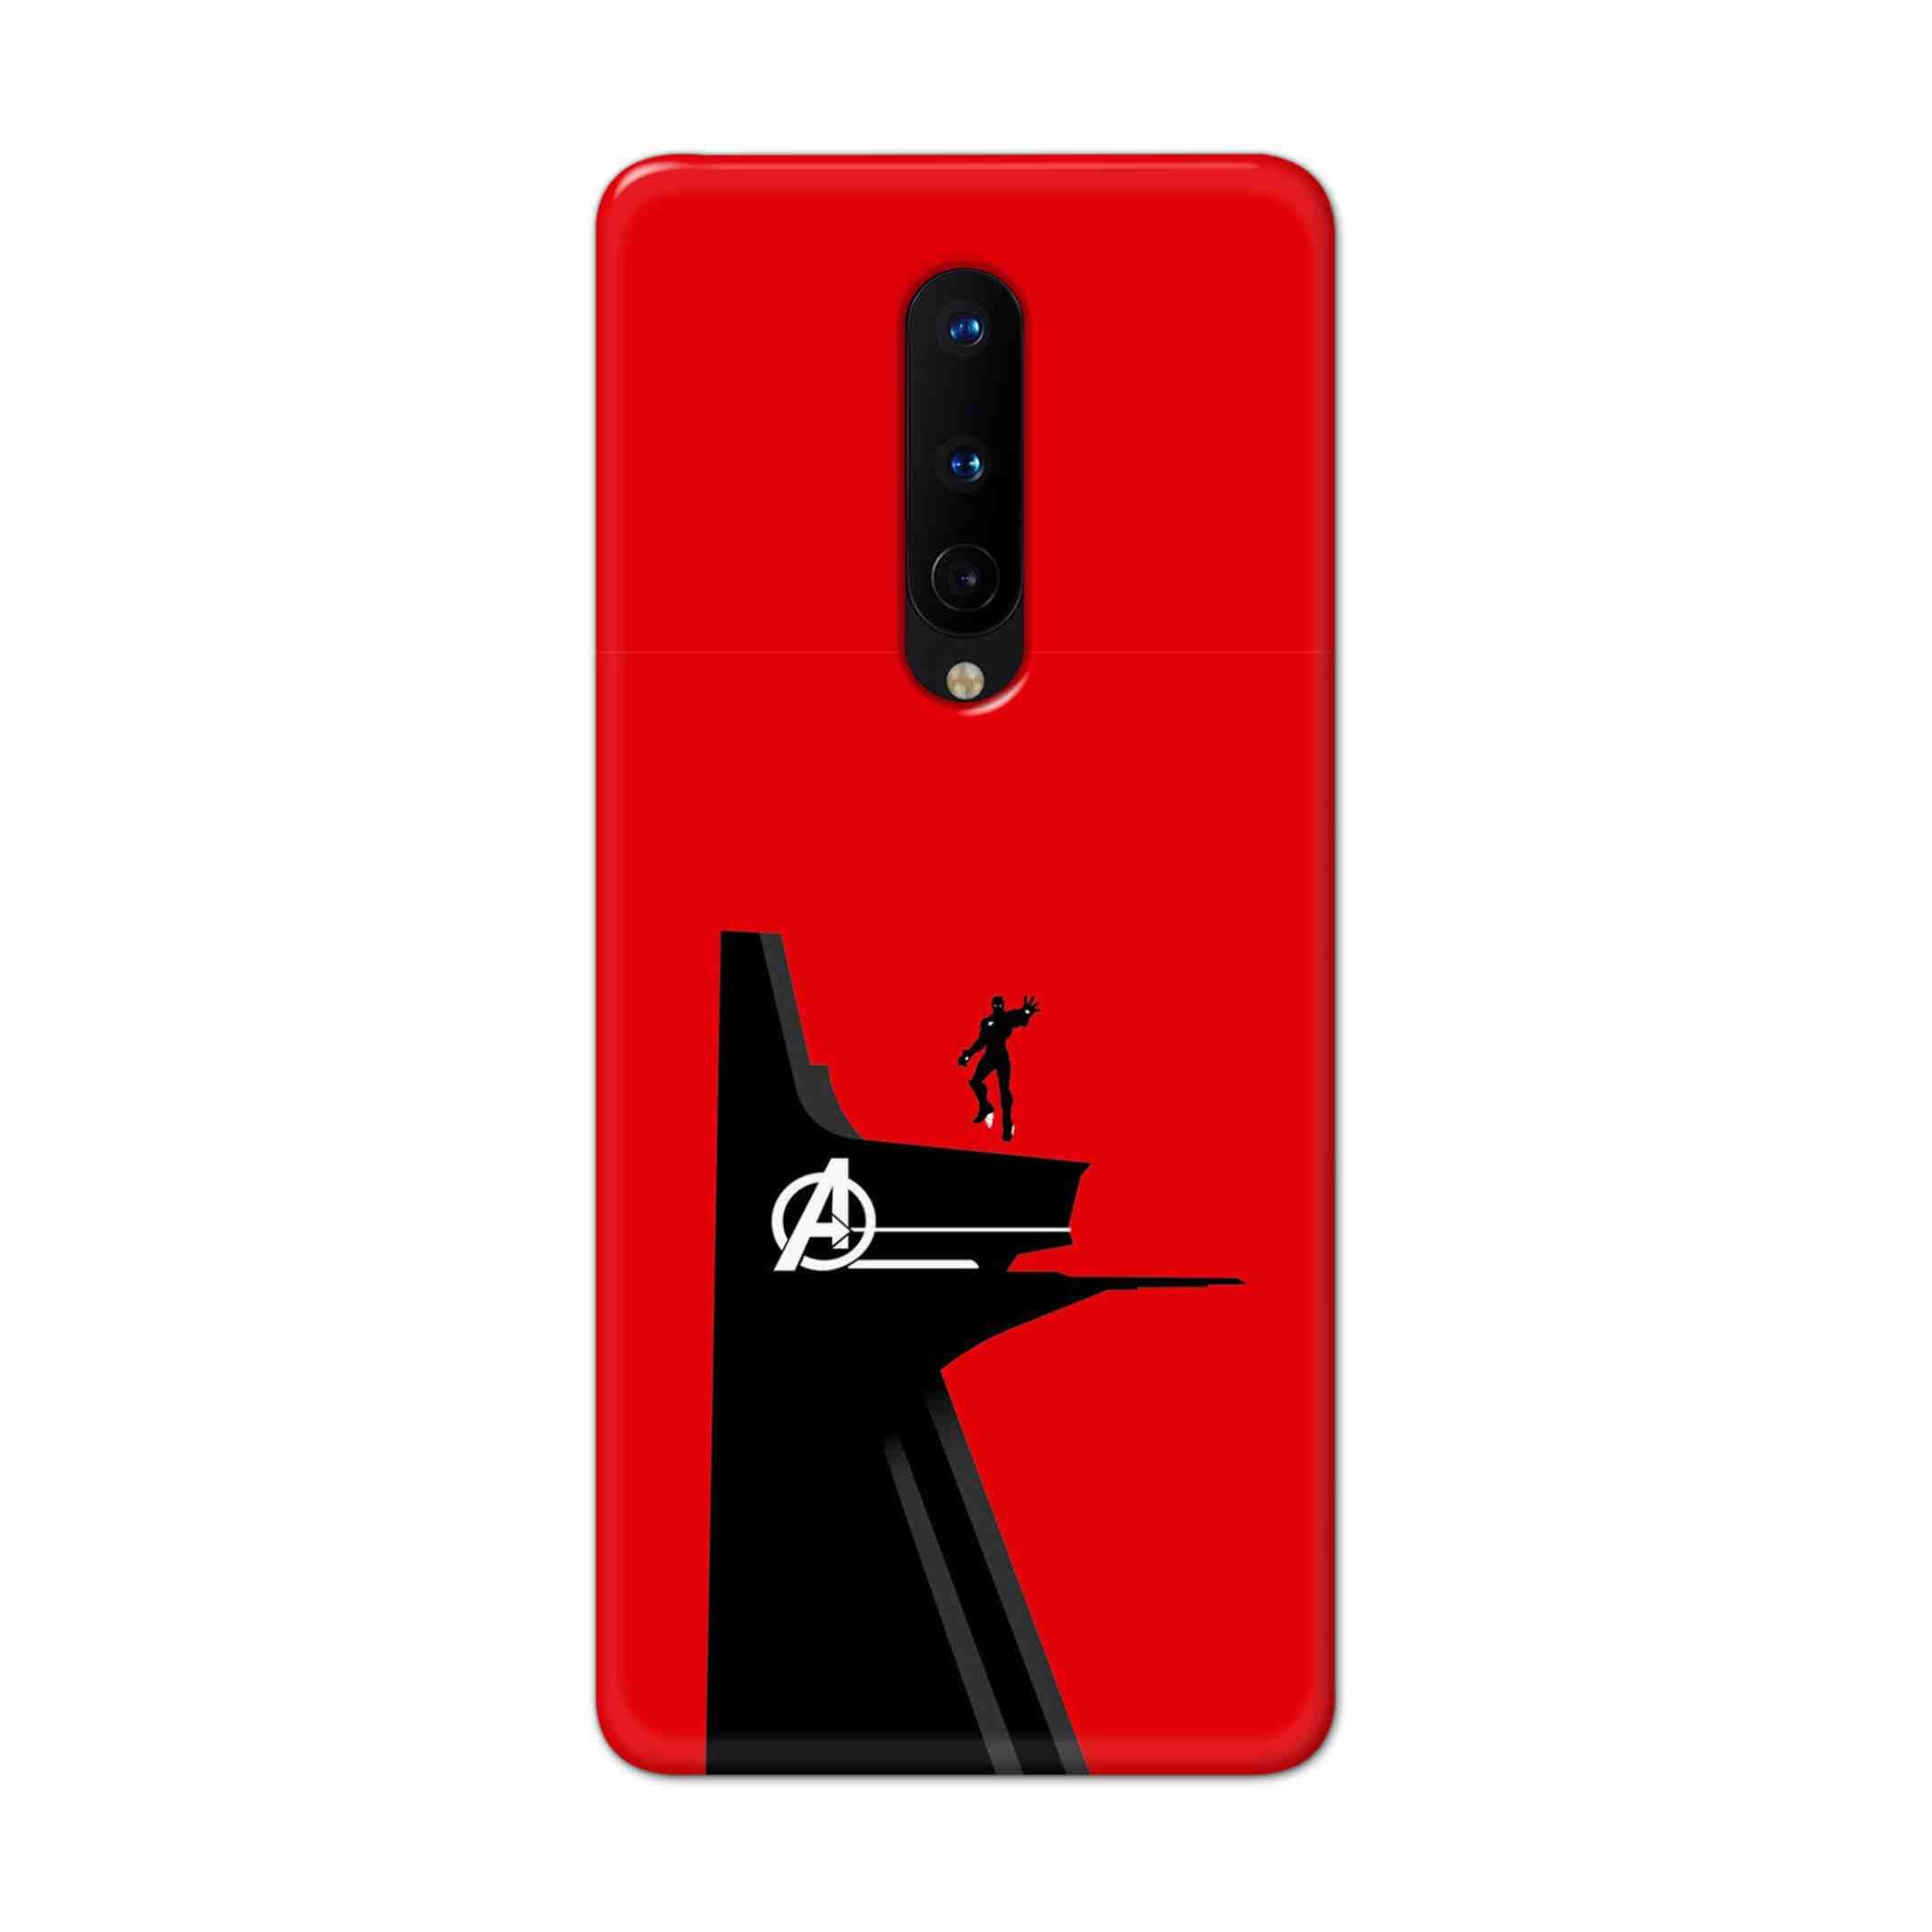 Buy Iron Man Hard Back Mobile Phone Case Cover For OnePlus 8 Online